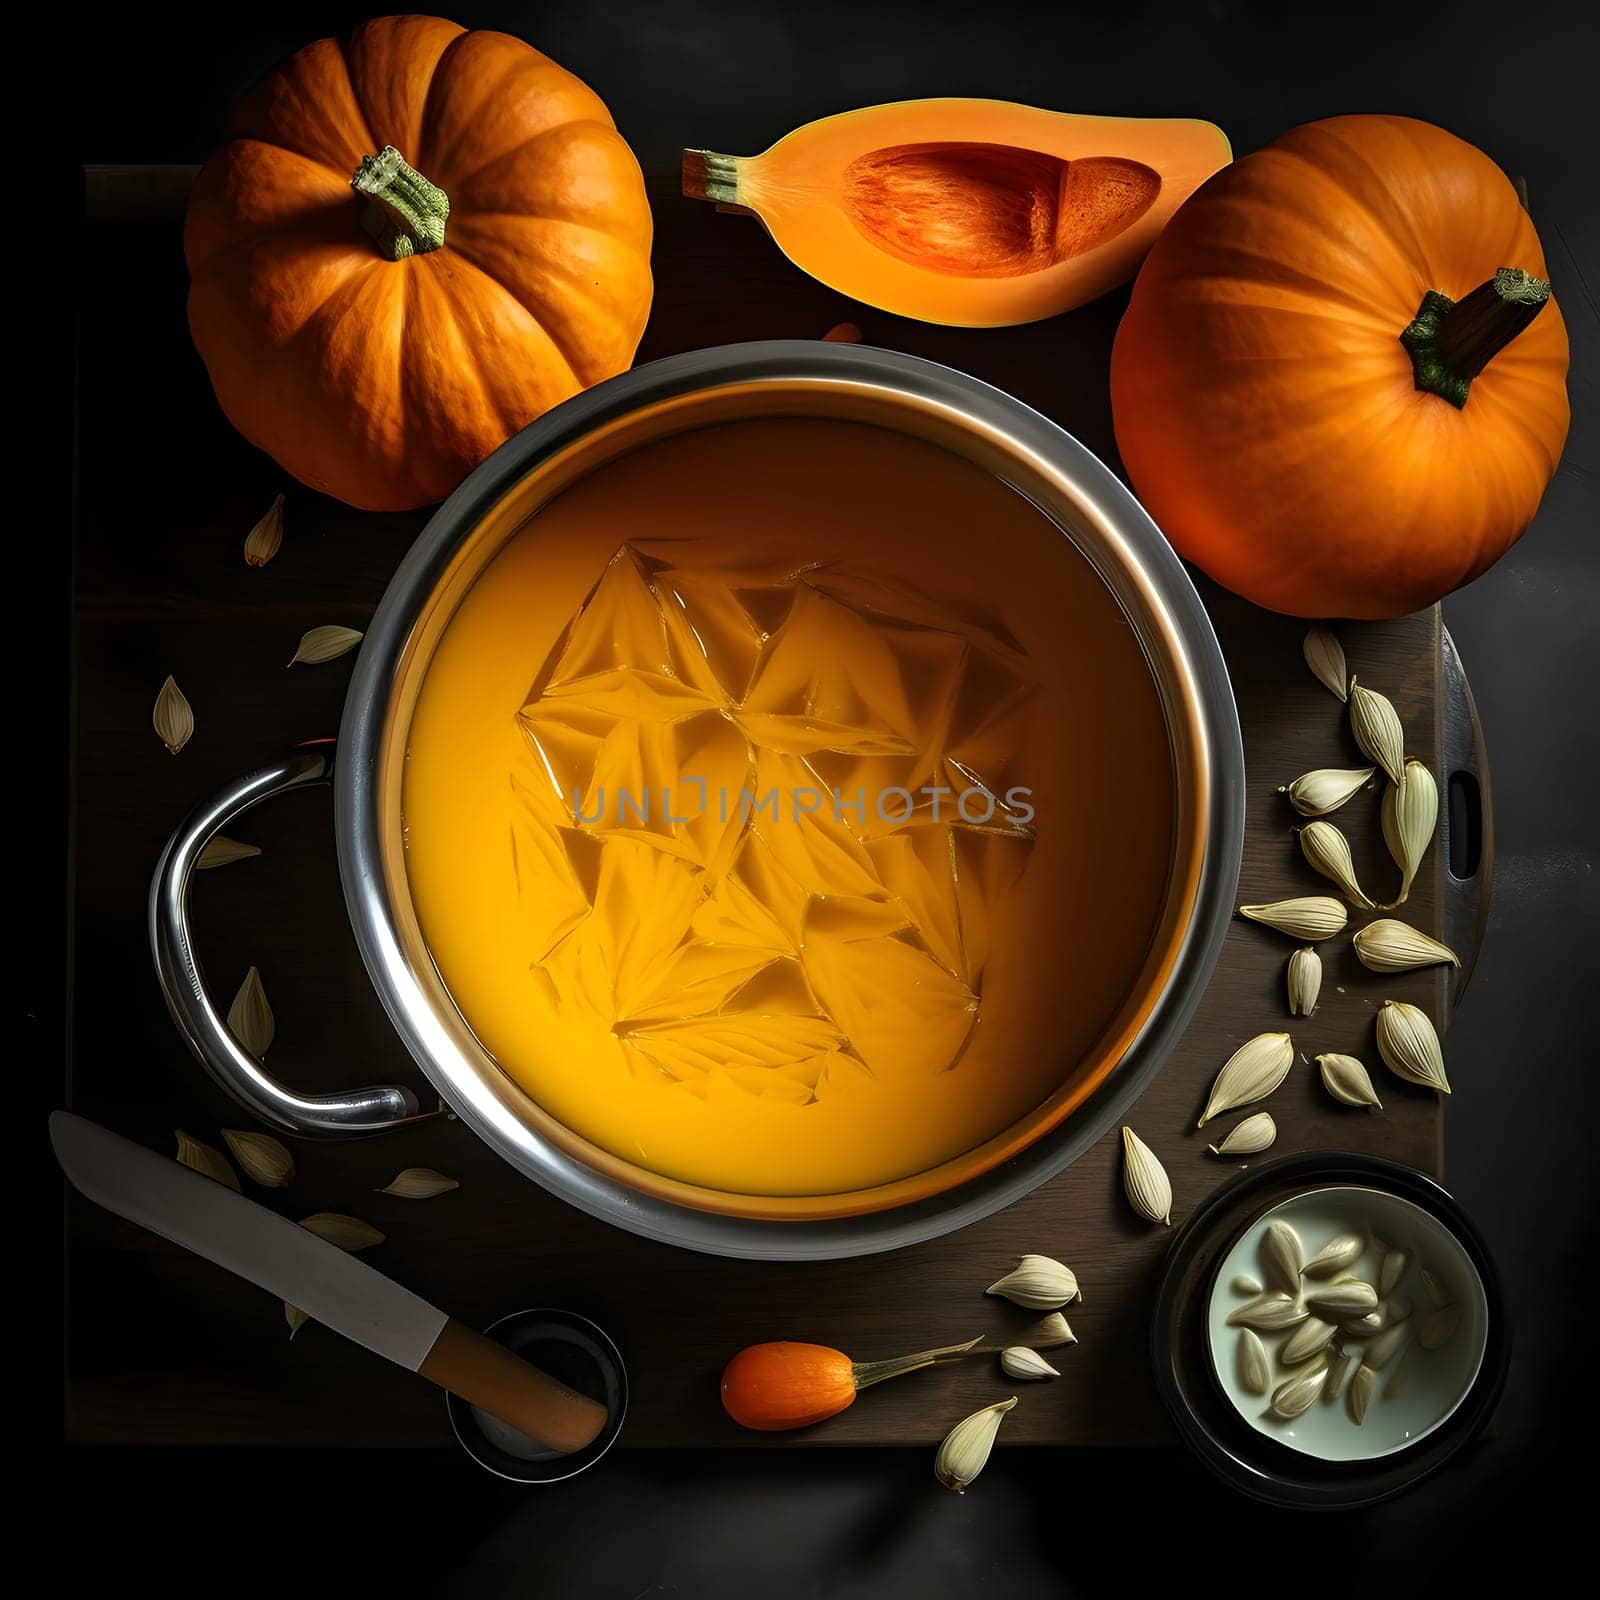 Top view of pumpkin soup around pumpkin seeds. Pumpkin as a dish of thanksgiving for the harvest. The atmosphere of joy and celebration.